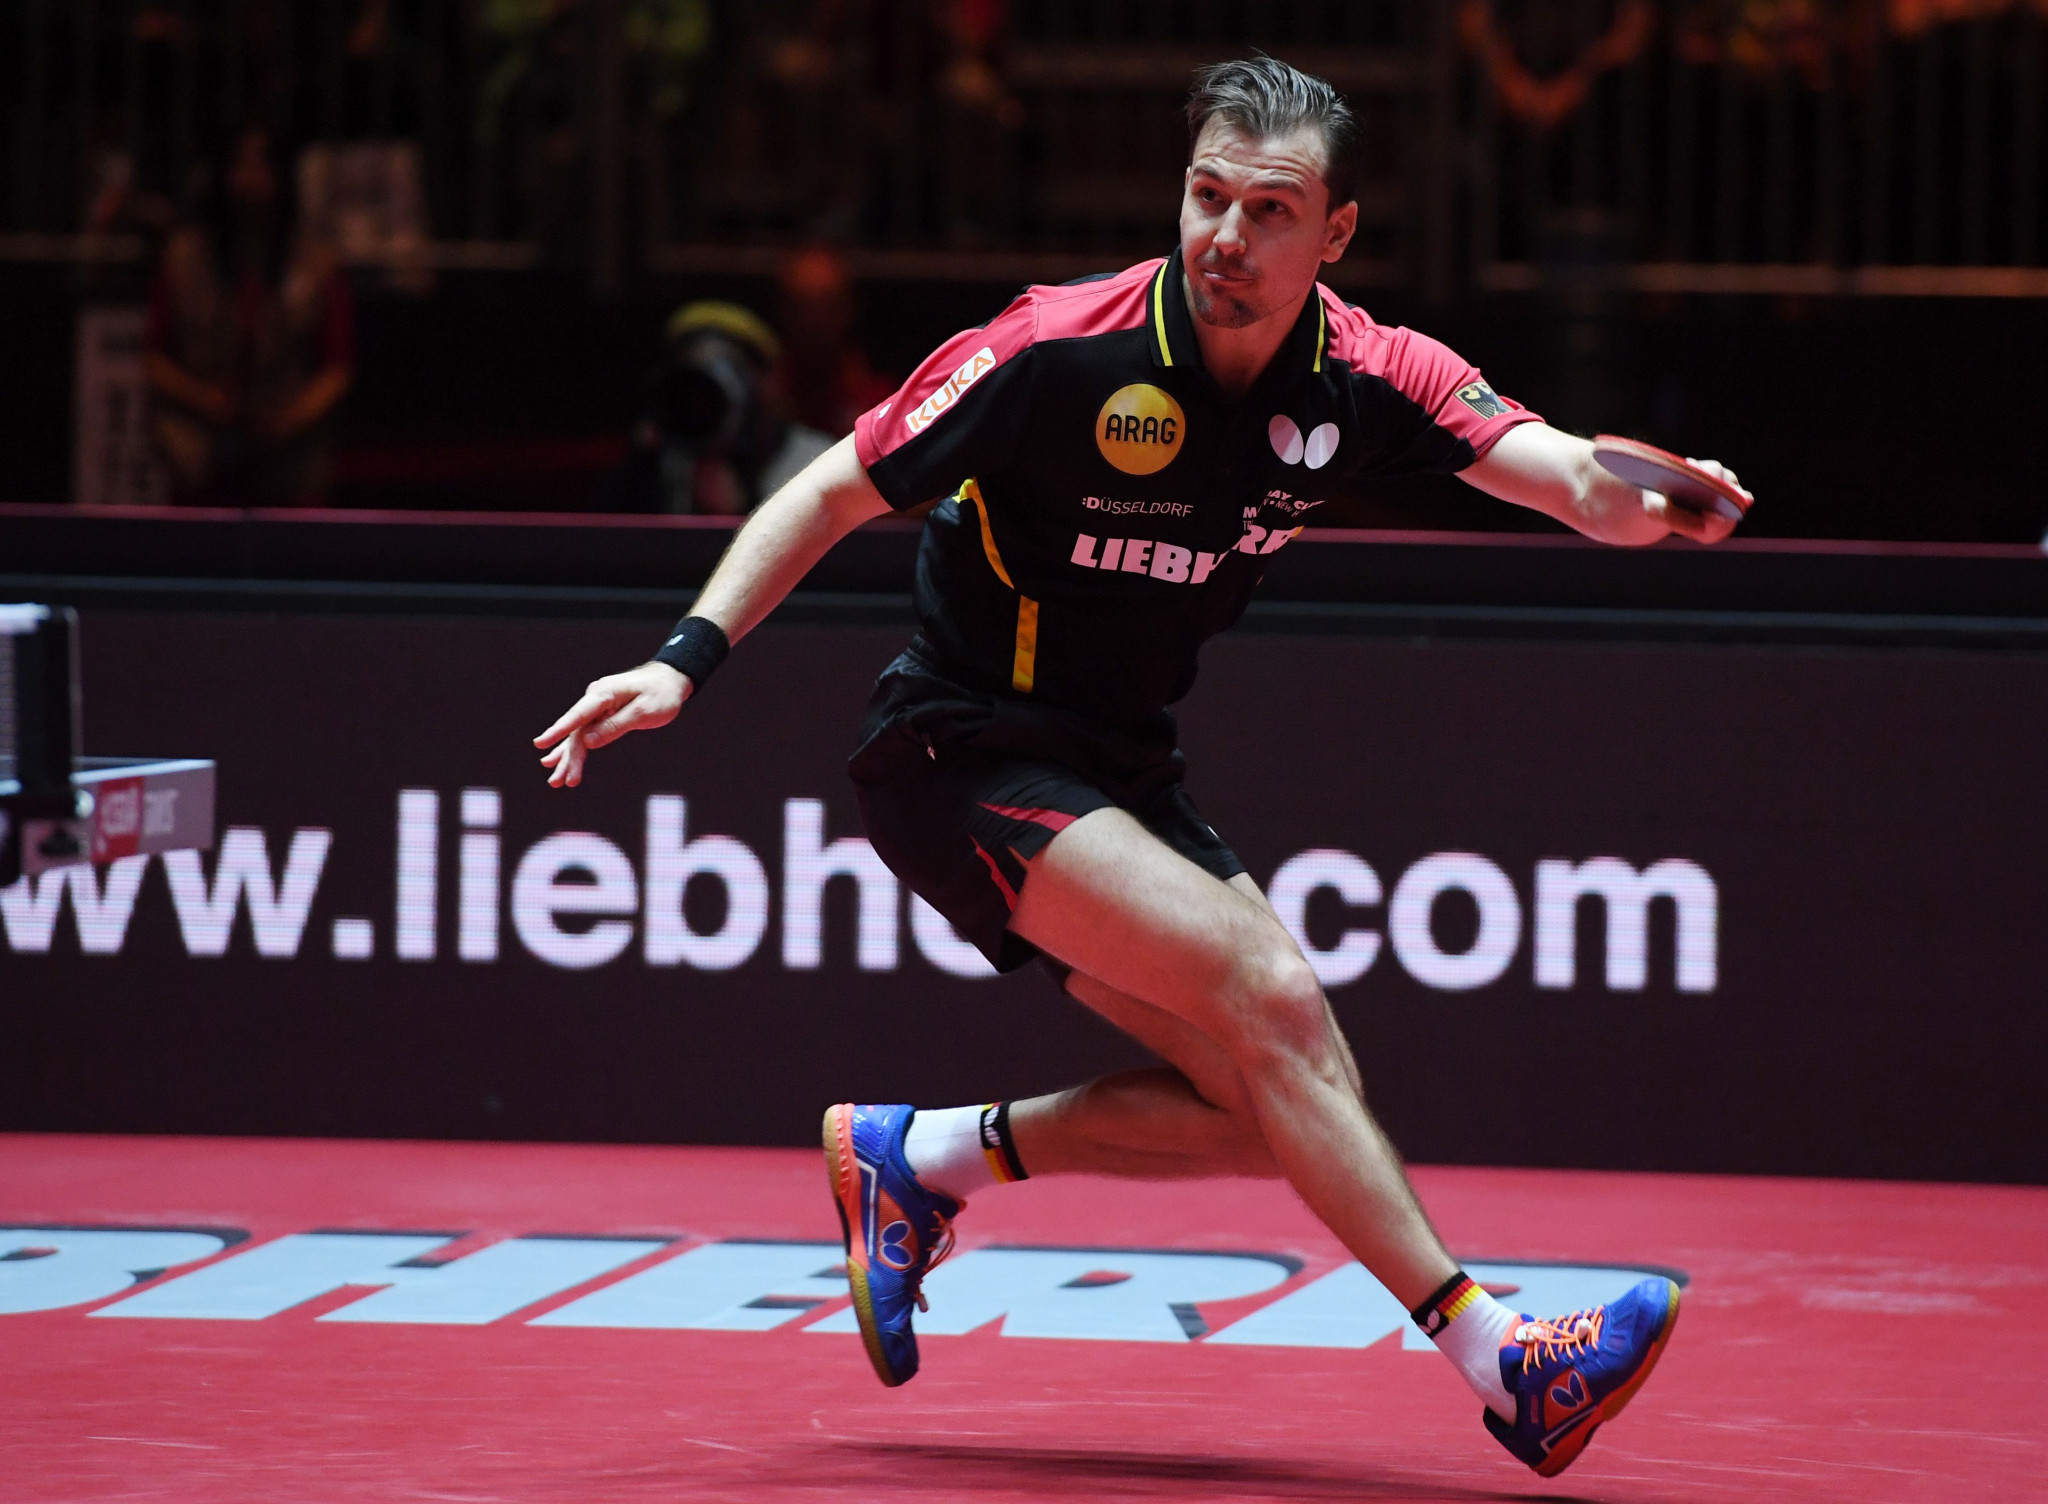 German veteran Timo Boll is hoping to continue his strong recent form ©Getty Images